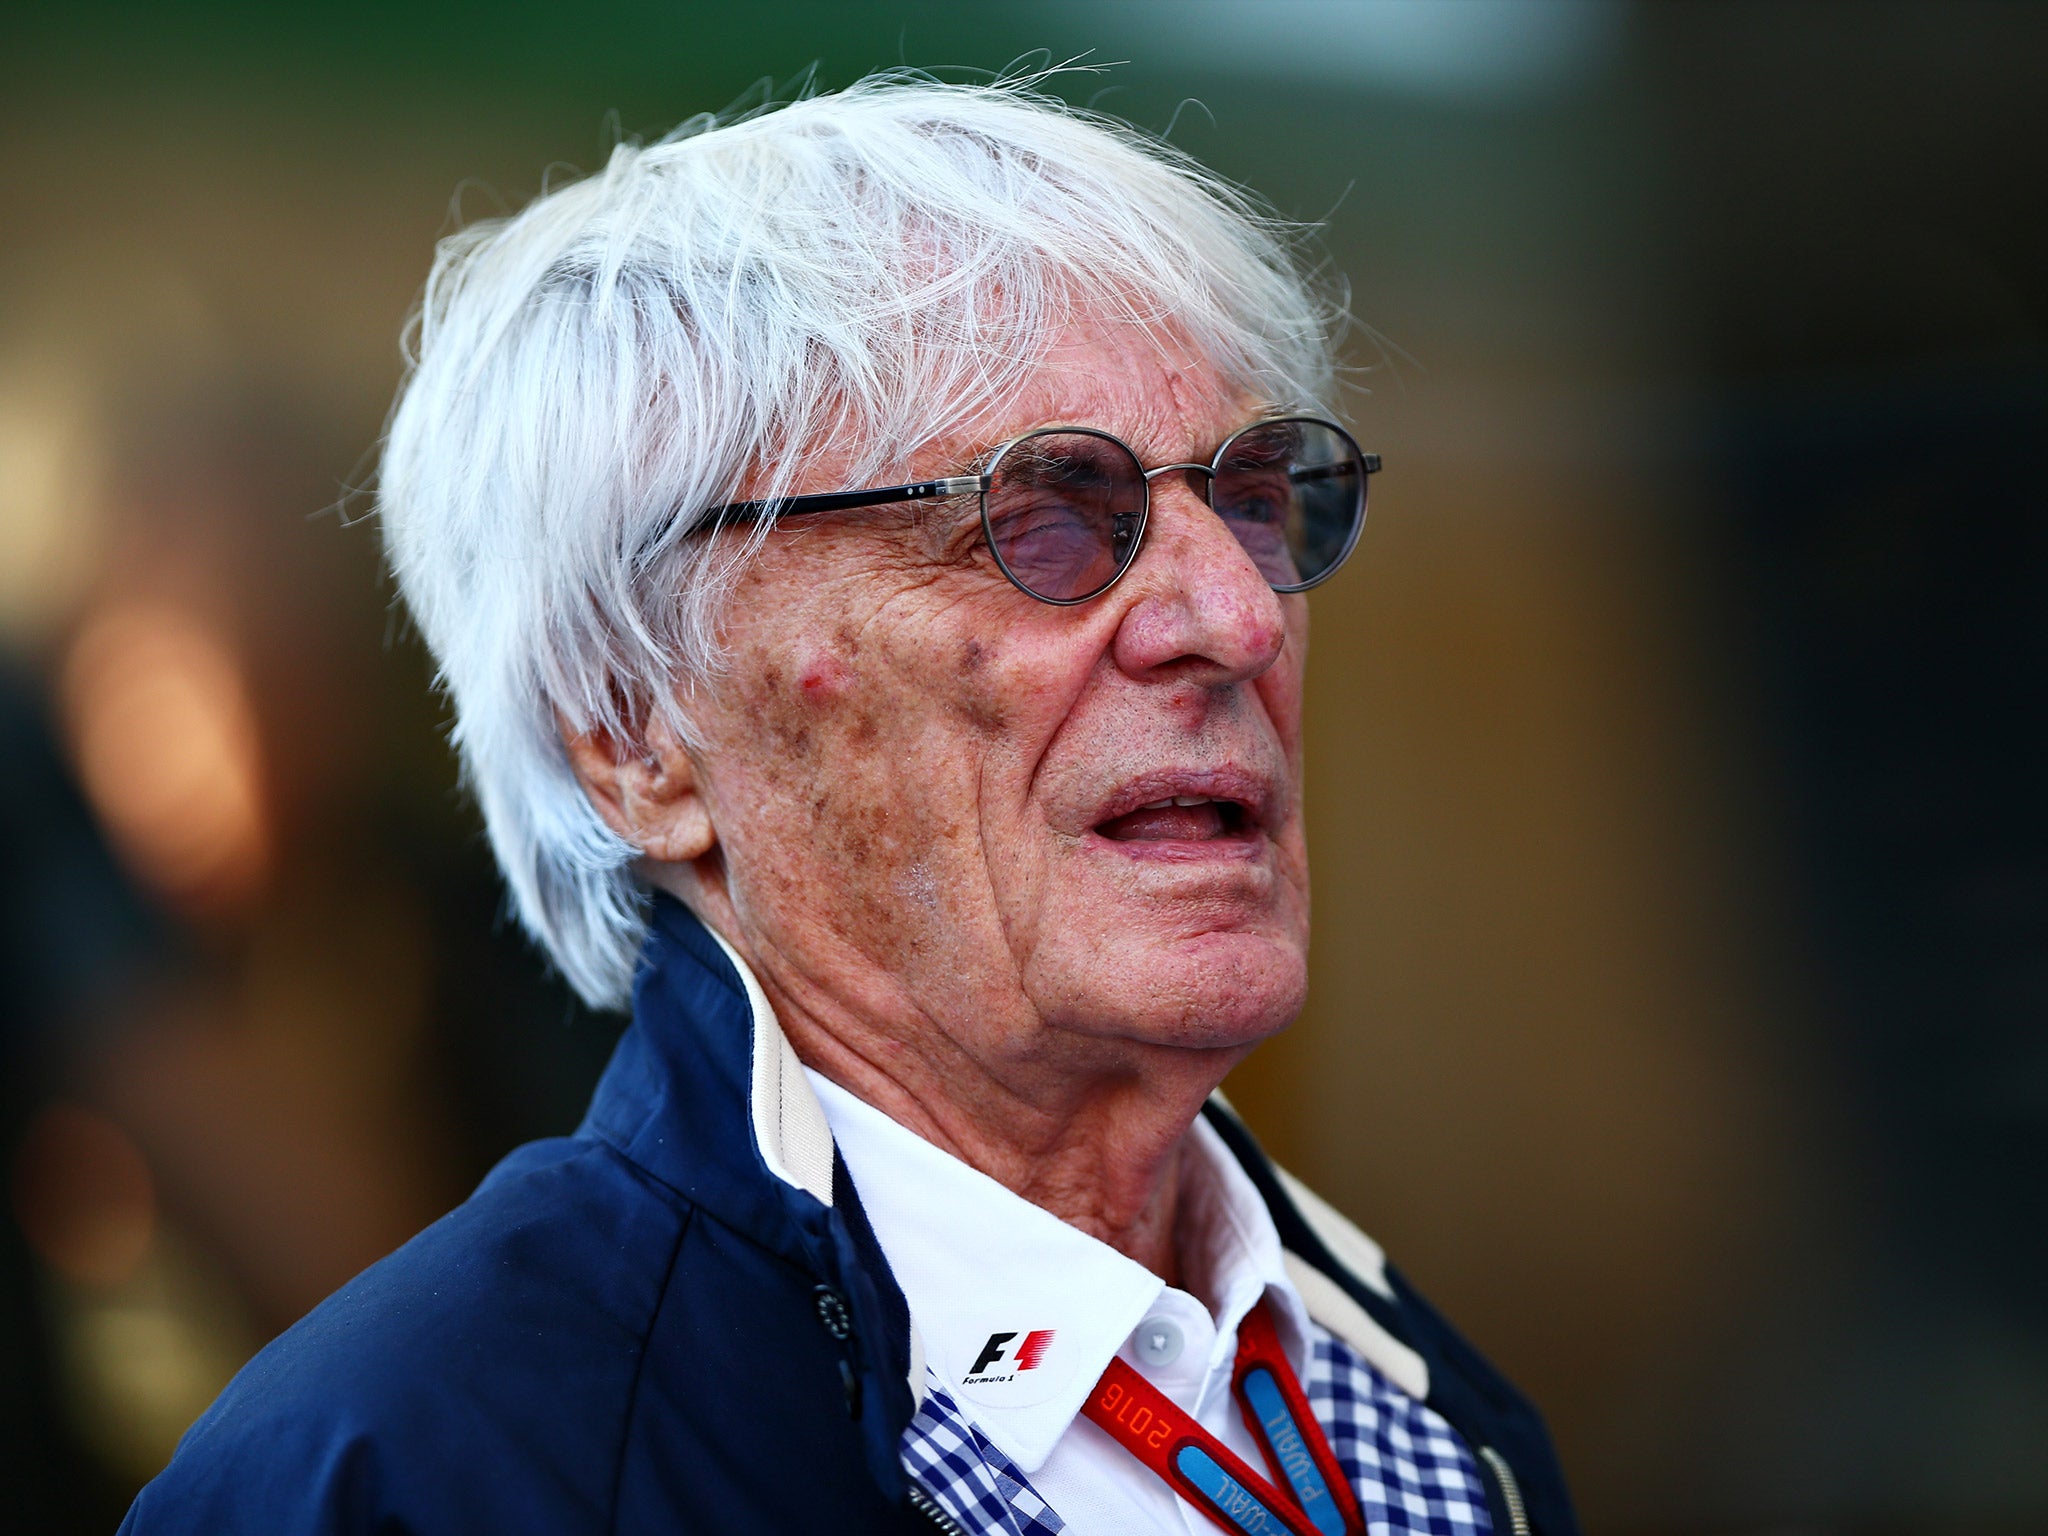 Ecclestone has little to do with the F1 management